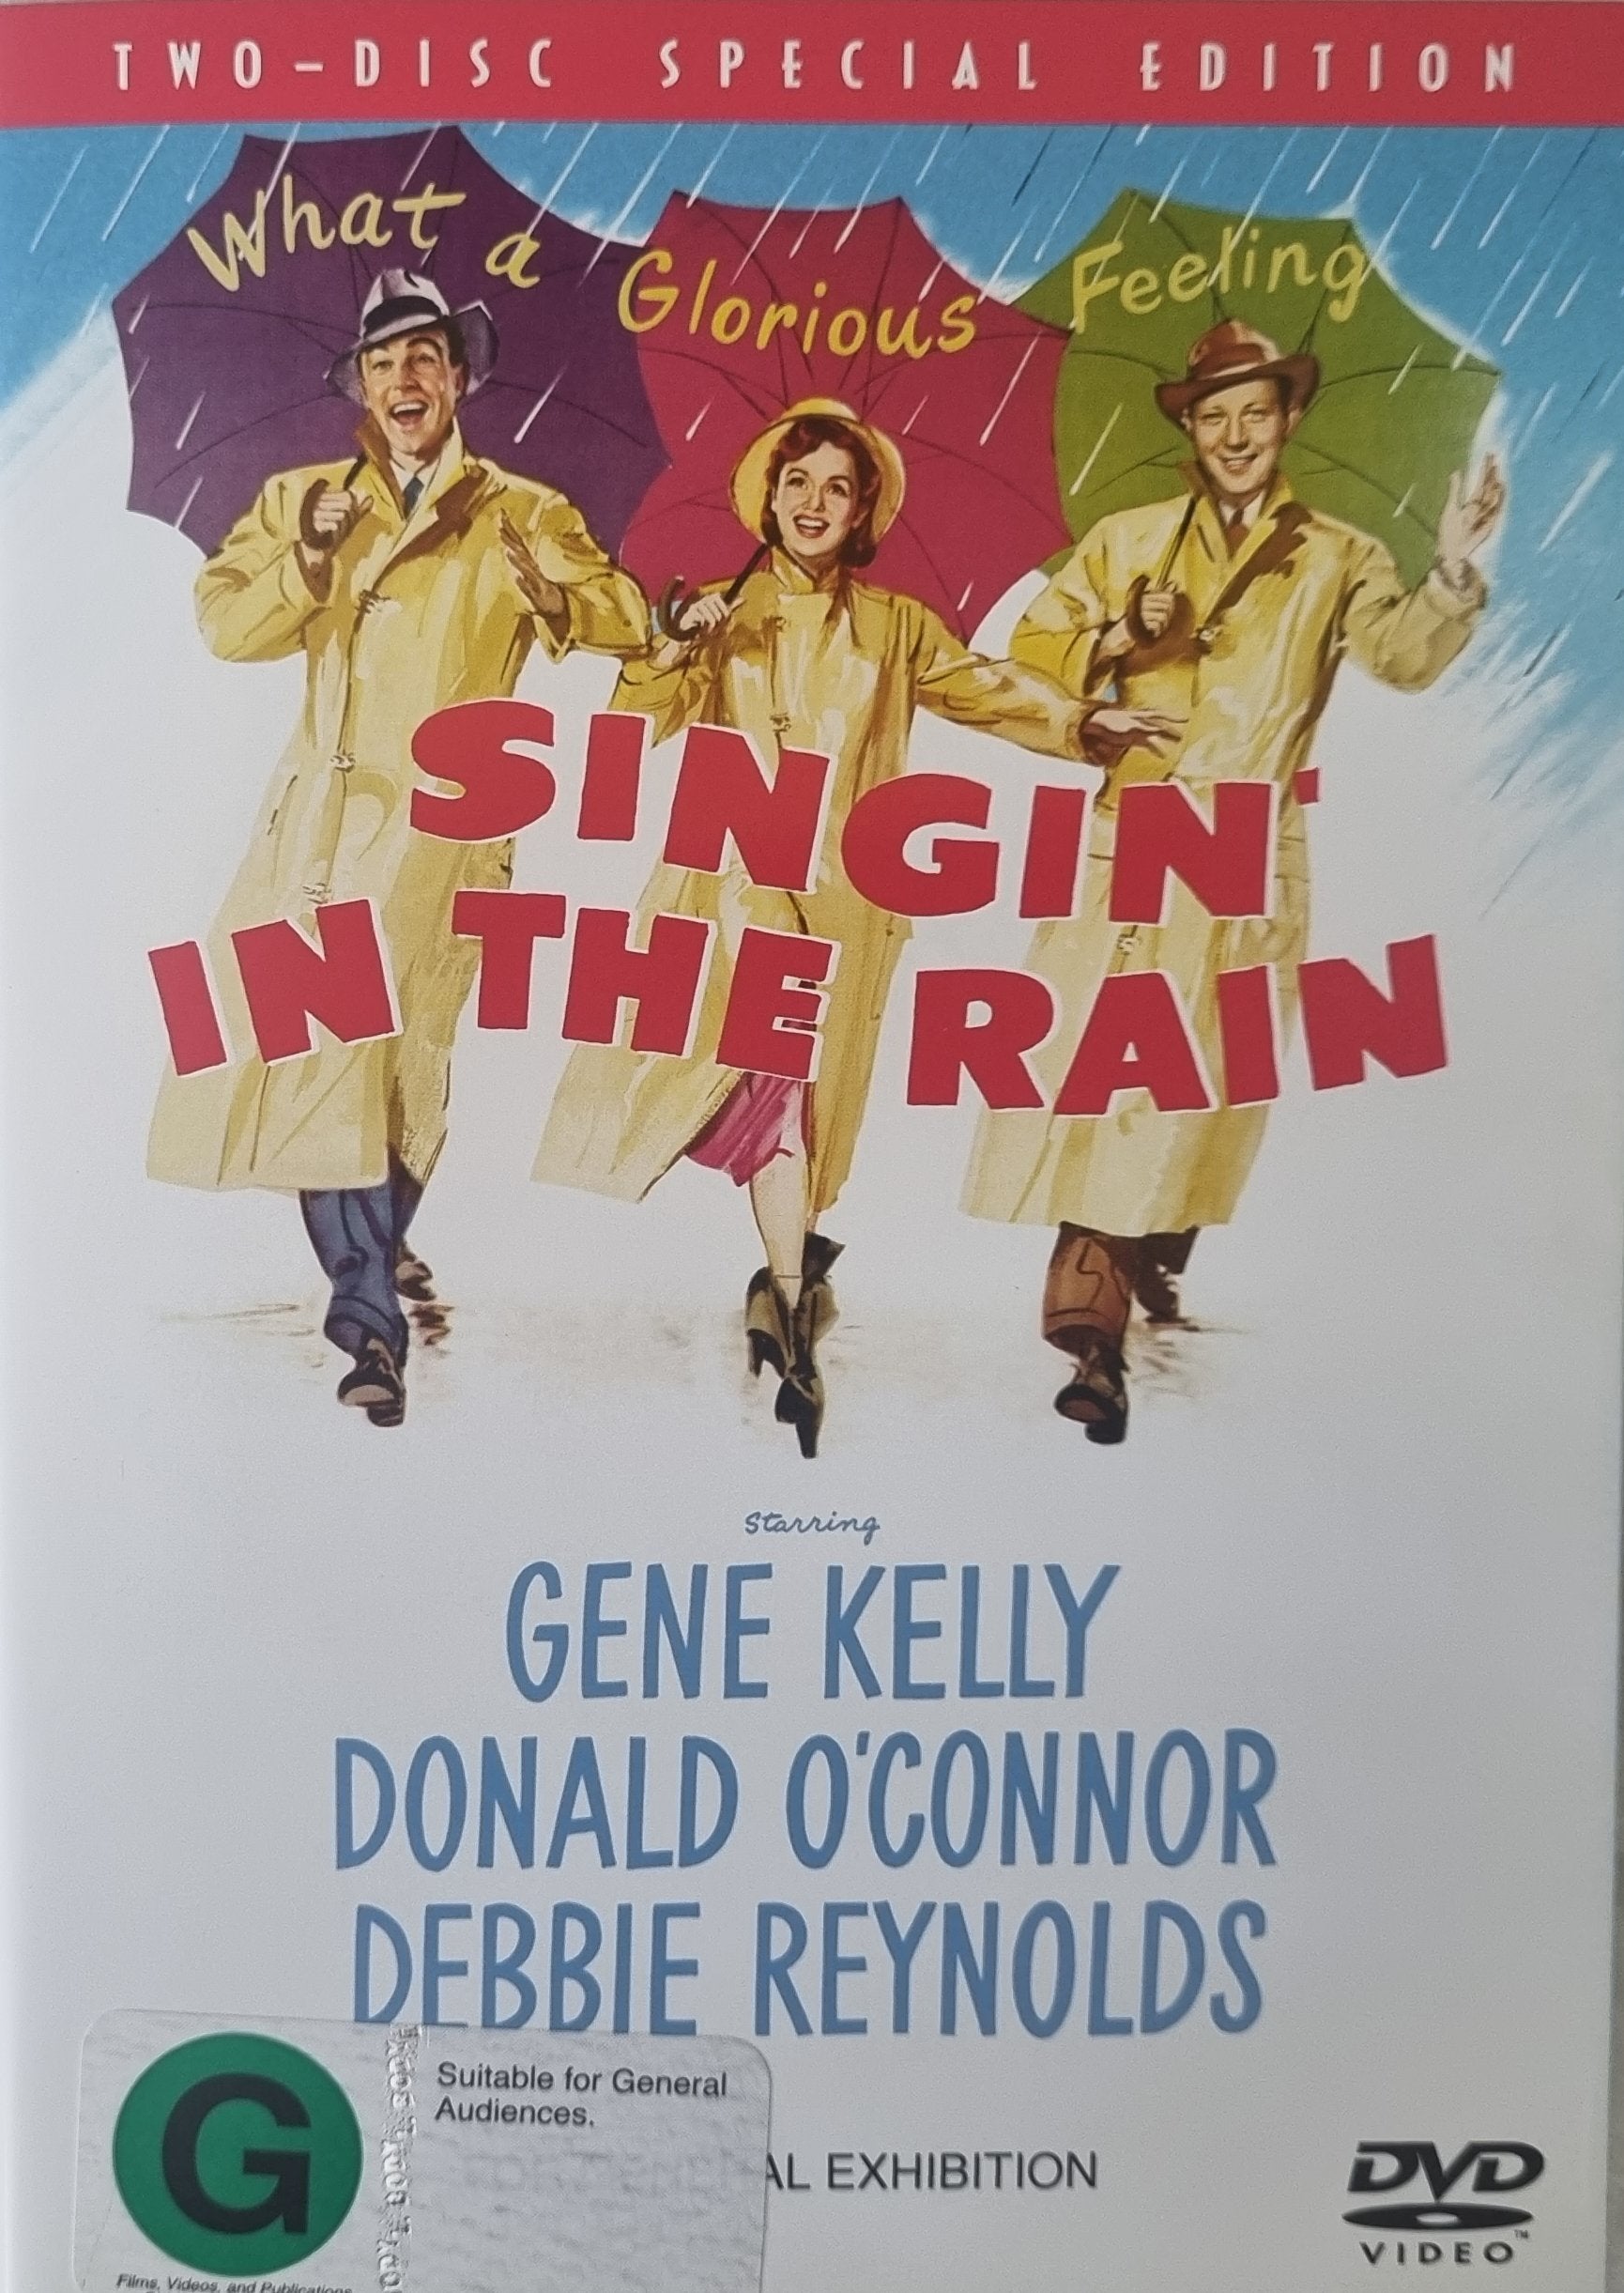 Singin' in the Rain (2 Disc Special Edition)